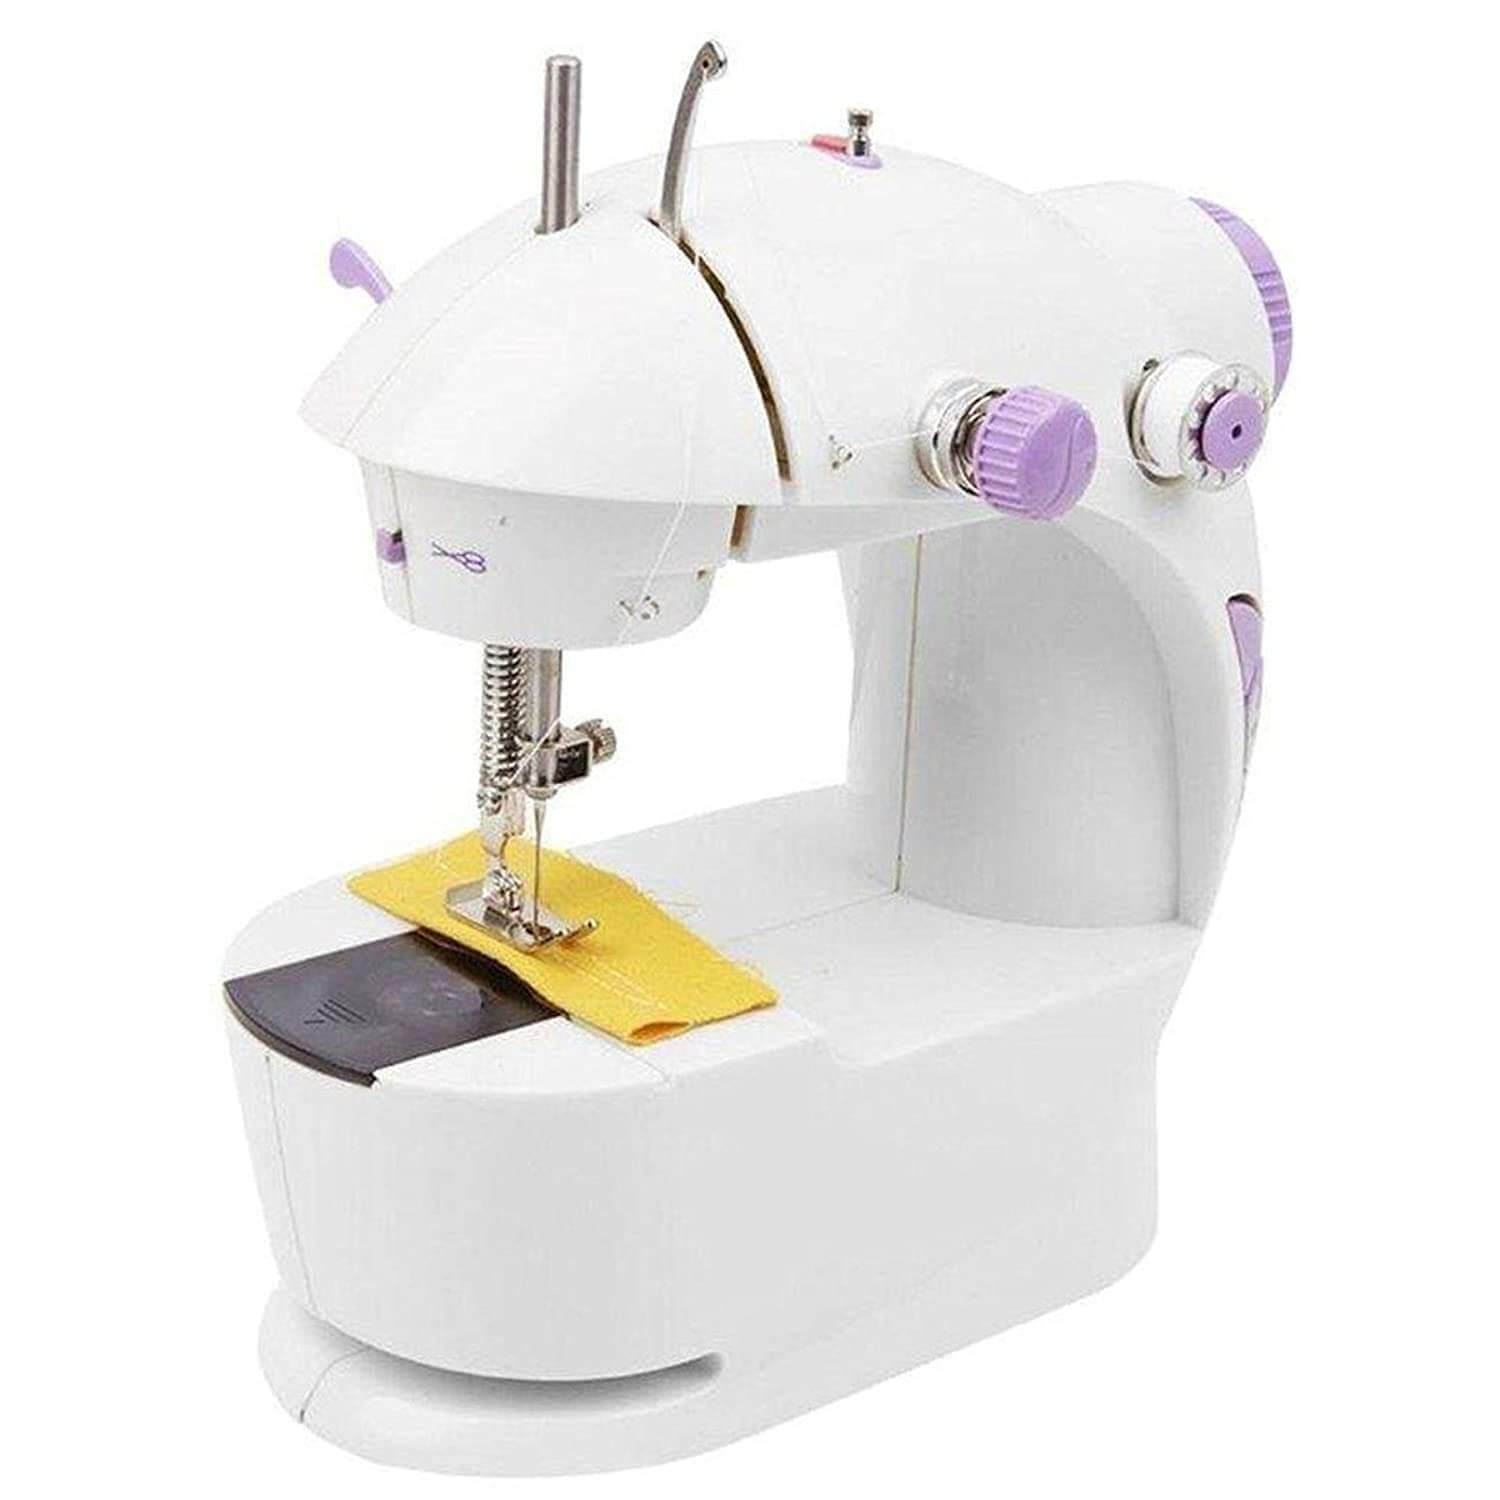 Handheld Sewing Machine, Quick Sewing & Portable Sewing Machines for  Emergency Sewing, Easy to Use Sewing Machine for Beginners, Hand Held  Sewing Device Suitable for Home, Travel and DIY